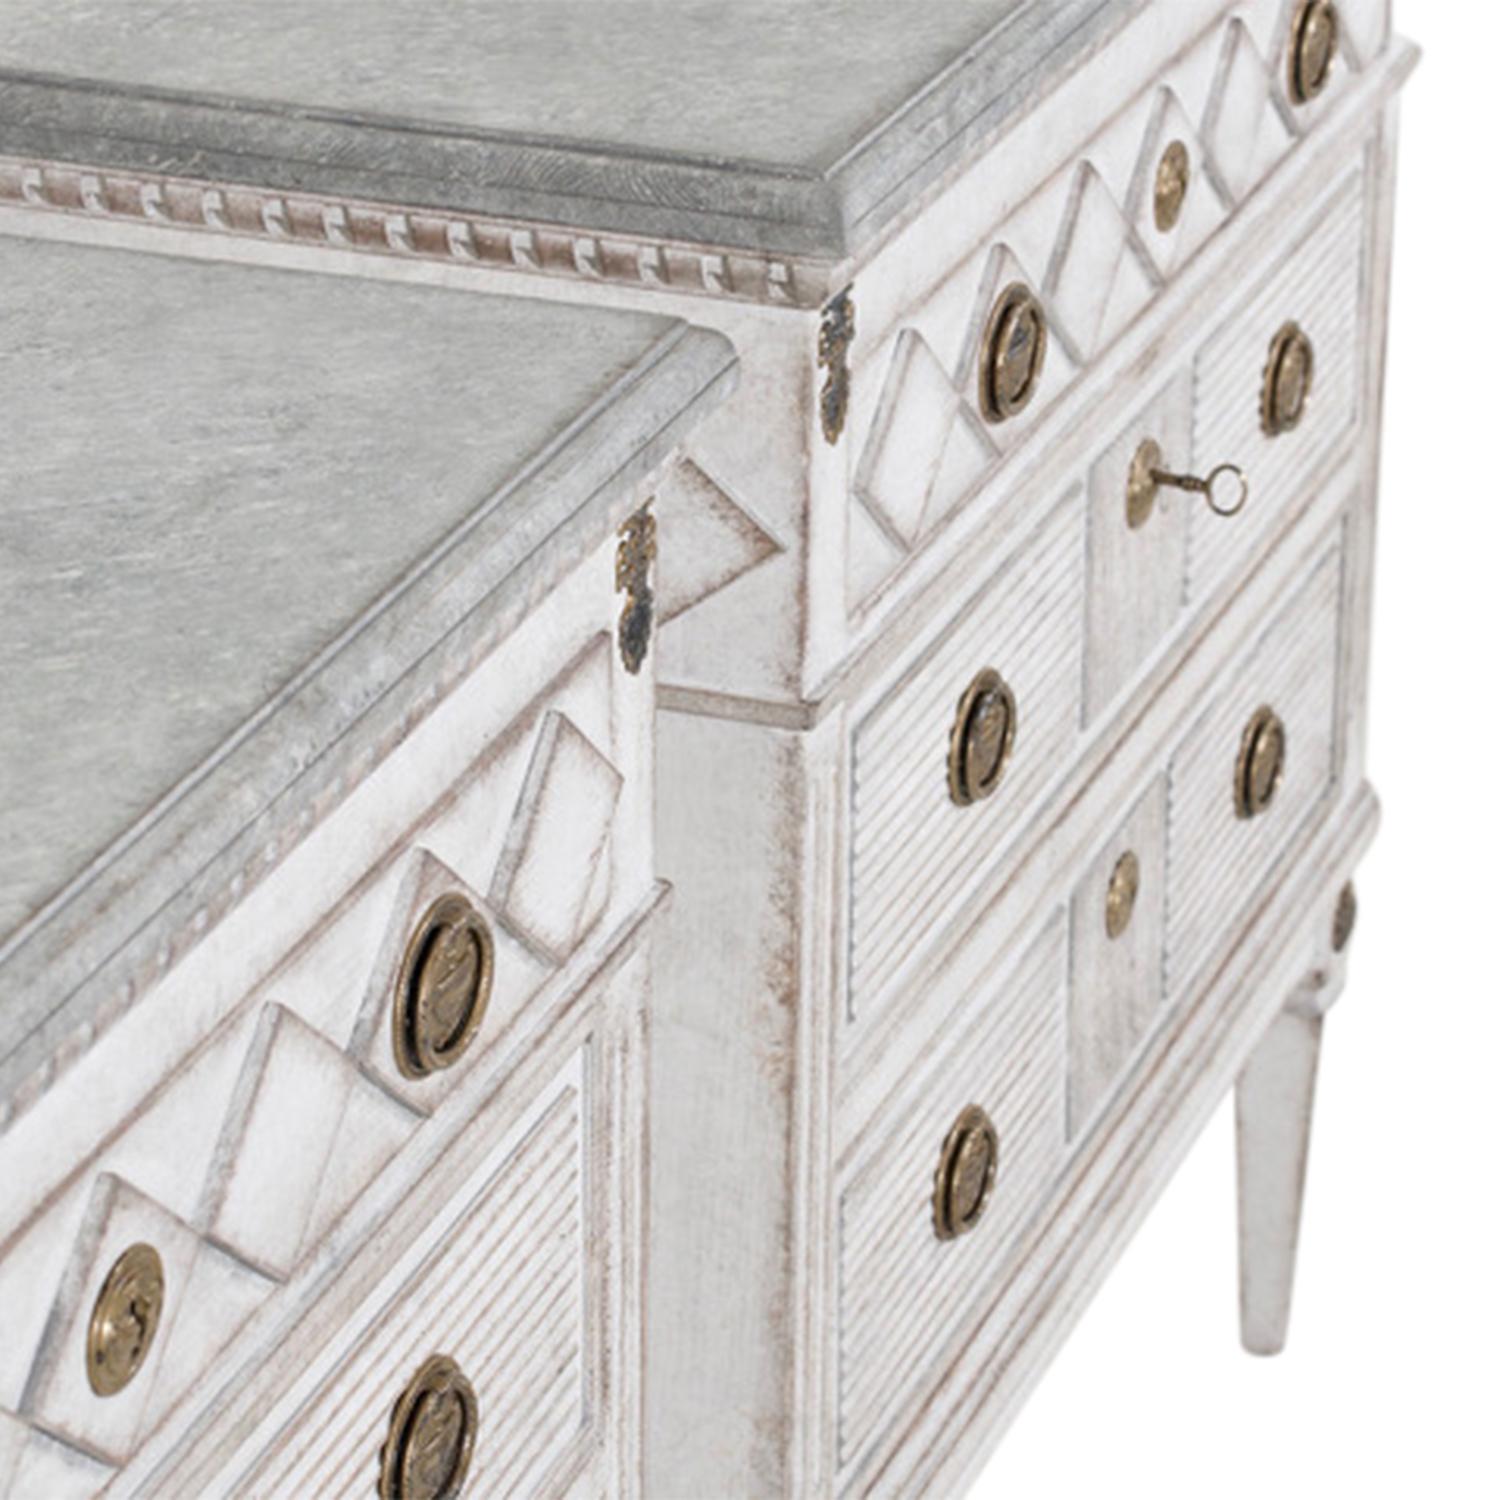 A 19th century, white-grey antique Swedish Gustavian pair of chests made of handcrafted painted Pinewood with two large drawers and one small one, in good condition. The Scandinavian cabinets, cupboards are composed with a light-blue, grey top